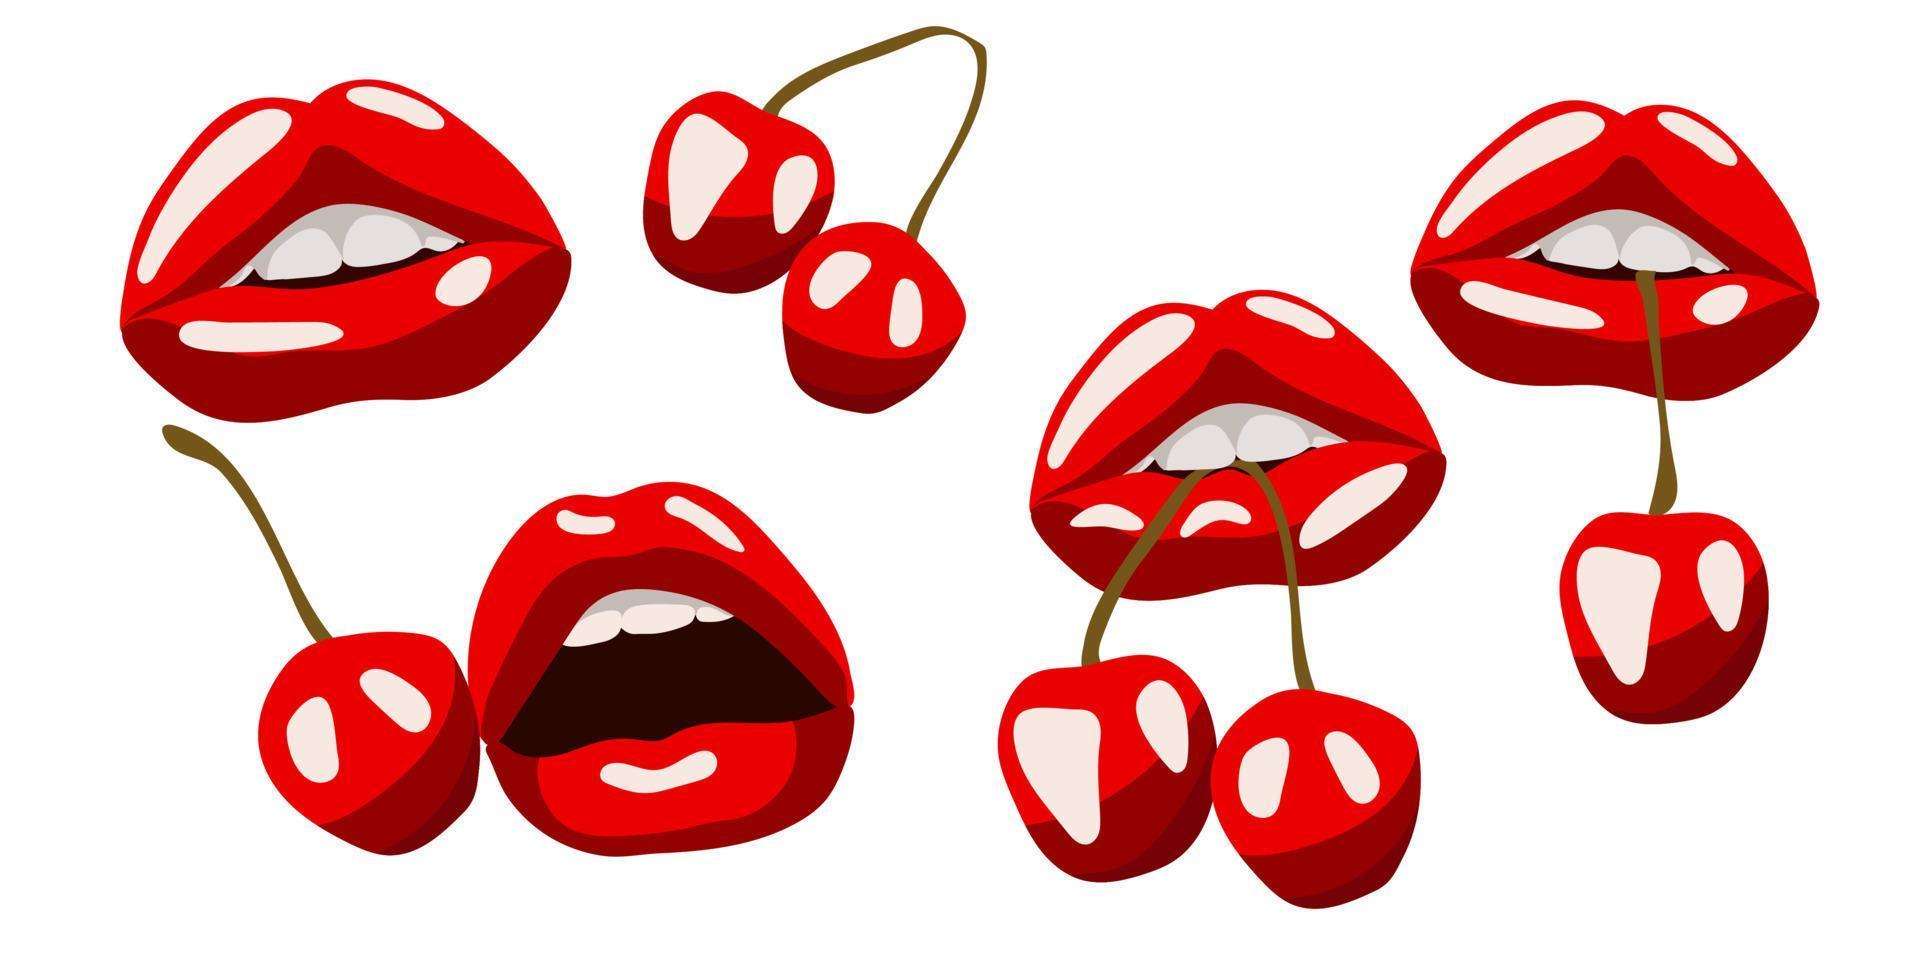 A set of red lips with cherry. Cherry in the teeth, in the mouth. A bright illustration for printing on banners. Vector illustration of sexy female lips. A kiss. Isolated on a white background.